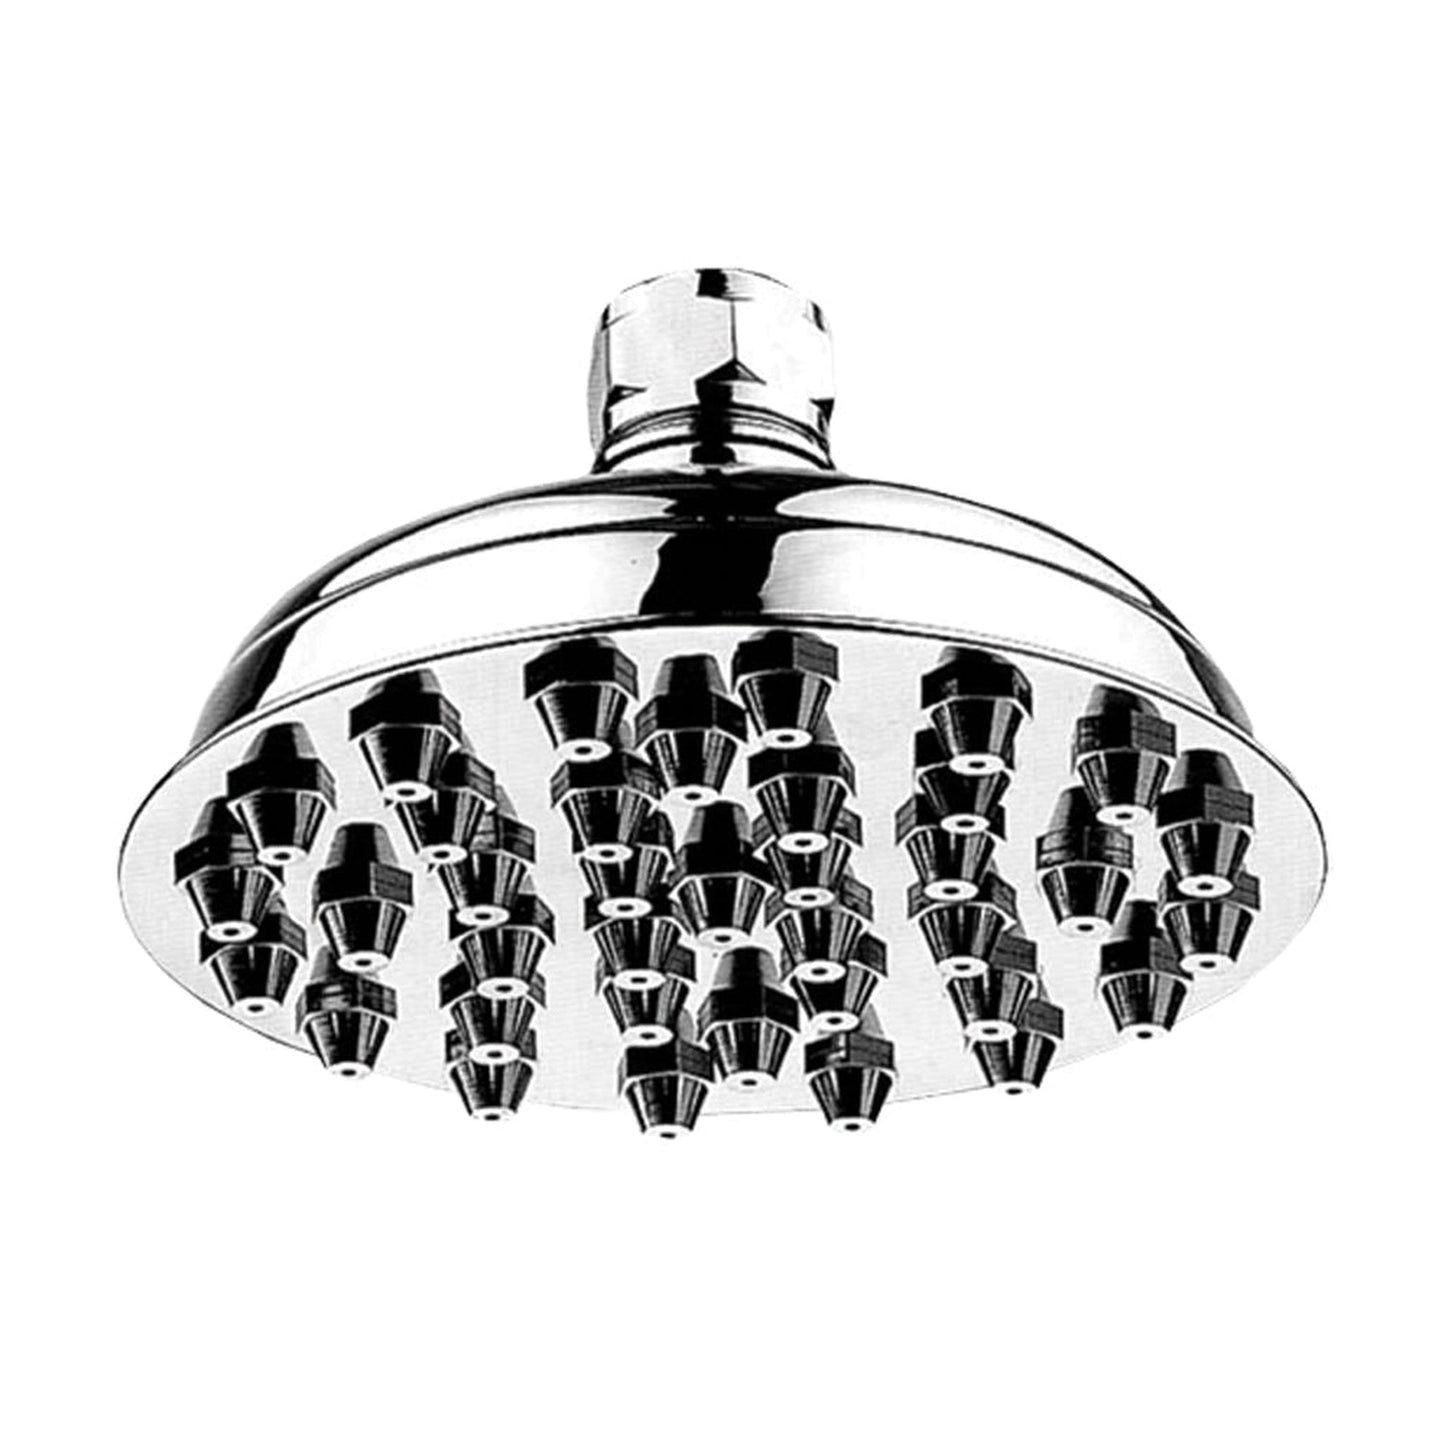 Whitehaus Showerhaus WHSM01-6-C Polished Chrome Small Sunflower Rainfall Showerhead With 37 Nozzles - Solid Brass Construction With Adjustable Ball Joint